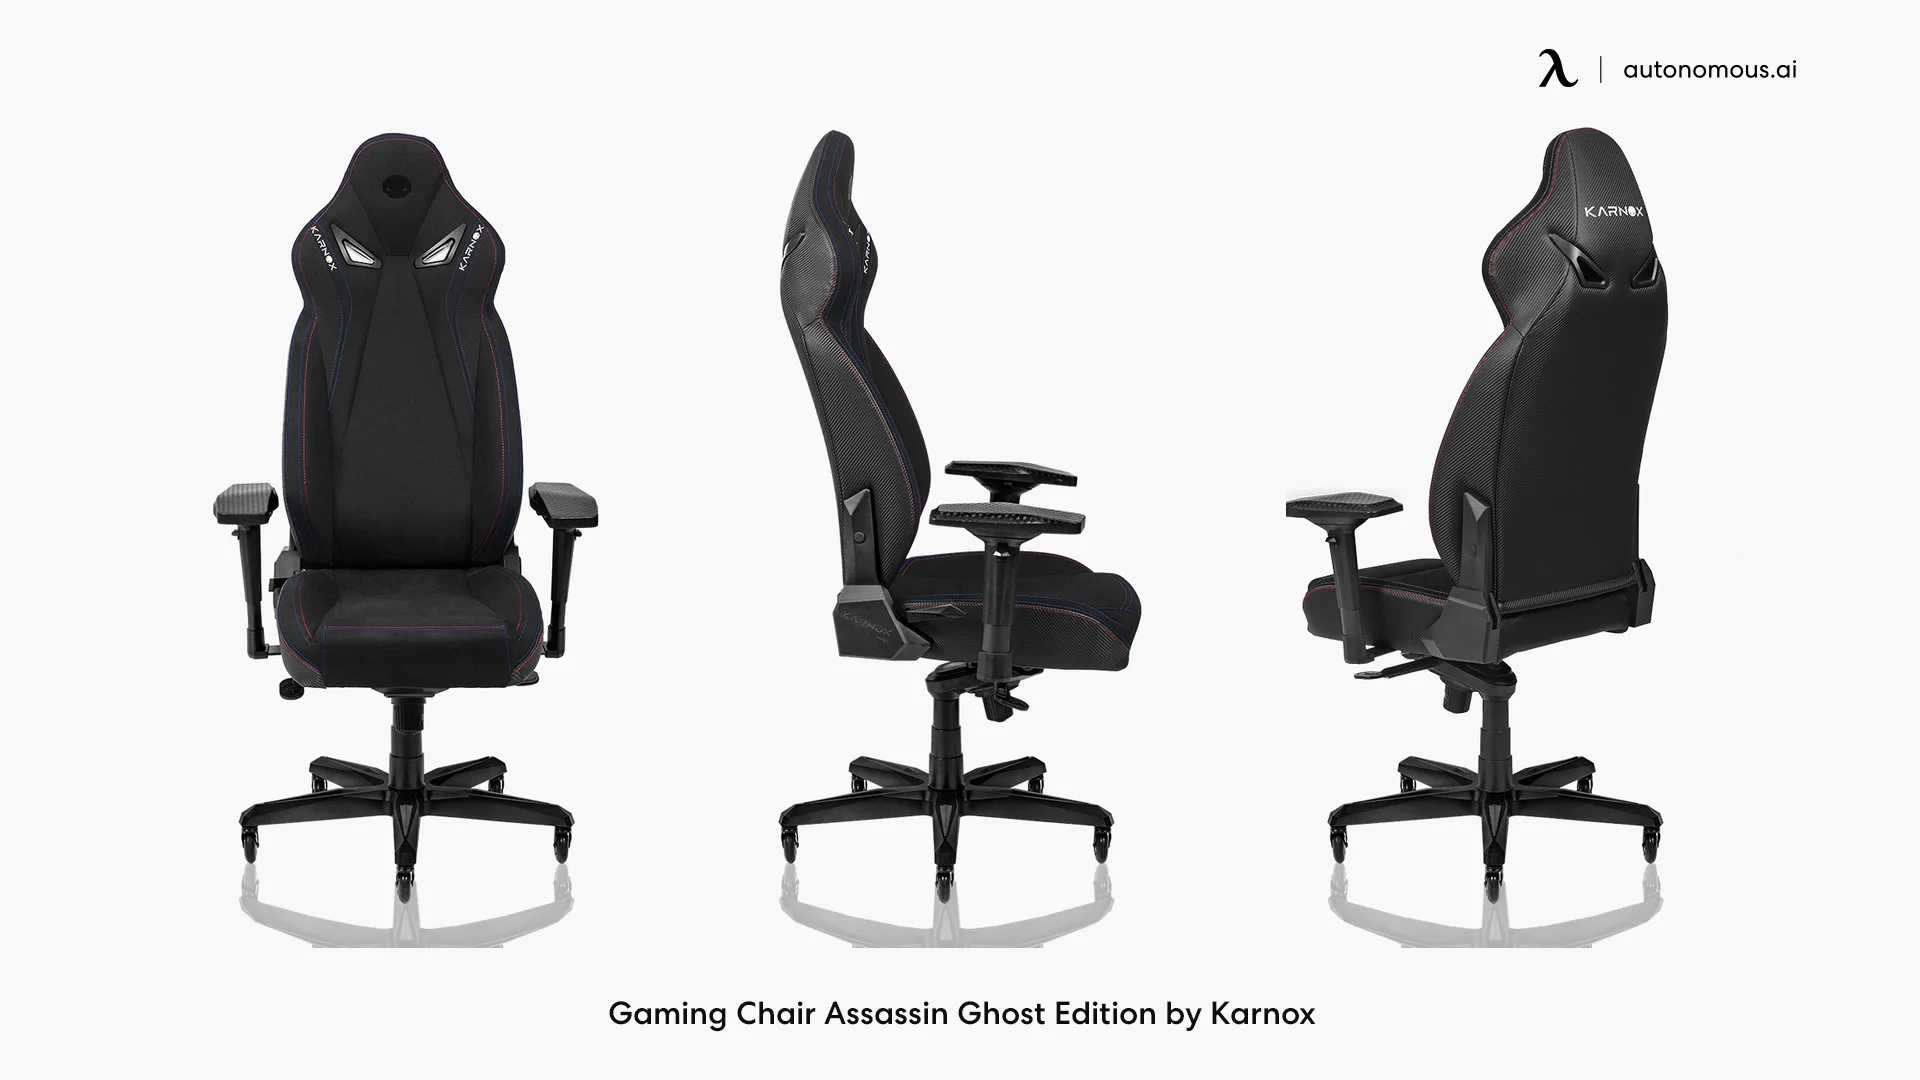 Gaming Chair Assassin Ghost Edition by Karnox